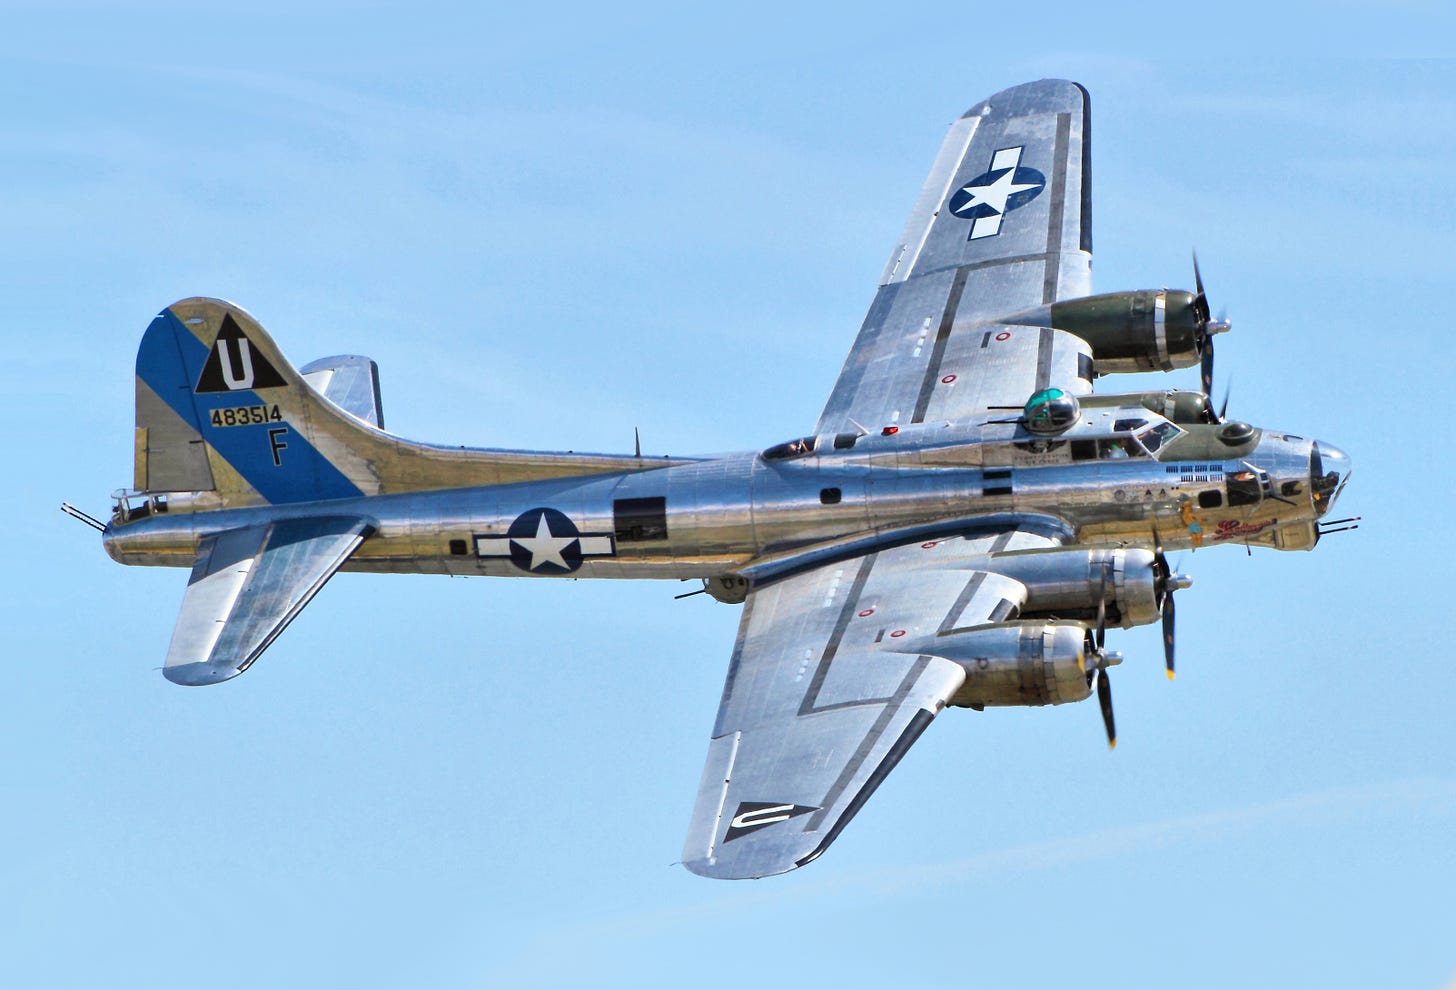 Boeing B-17 Flying Fortress - Wikipedia